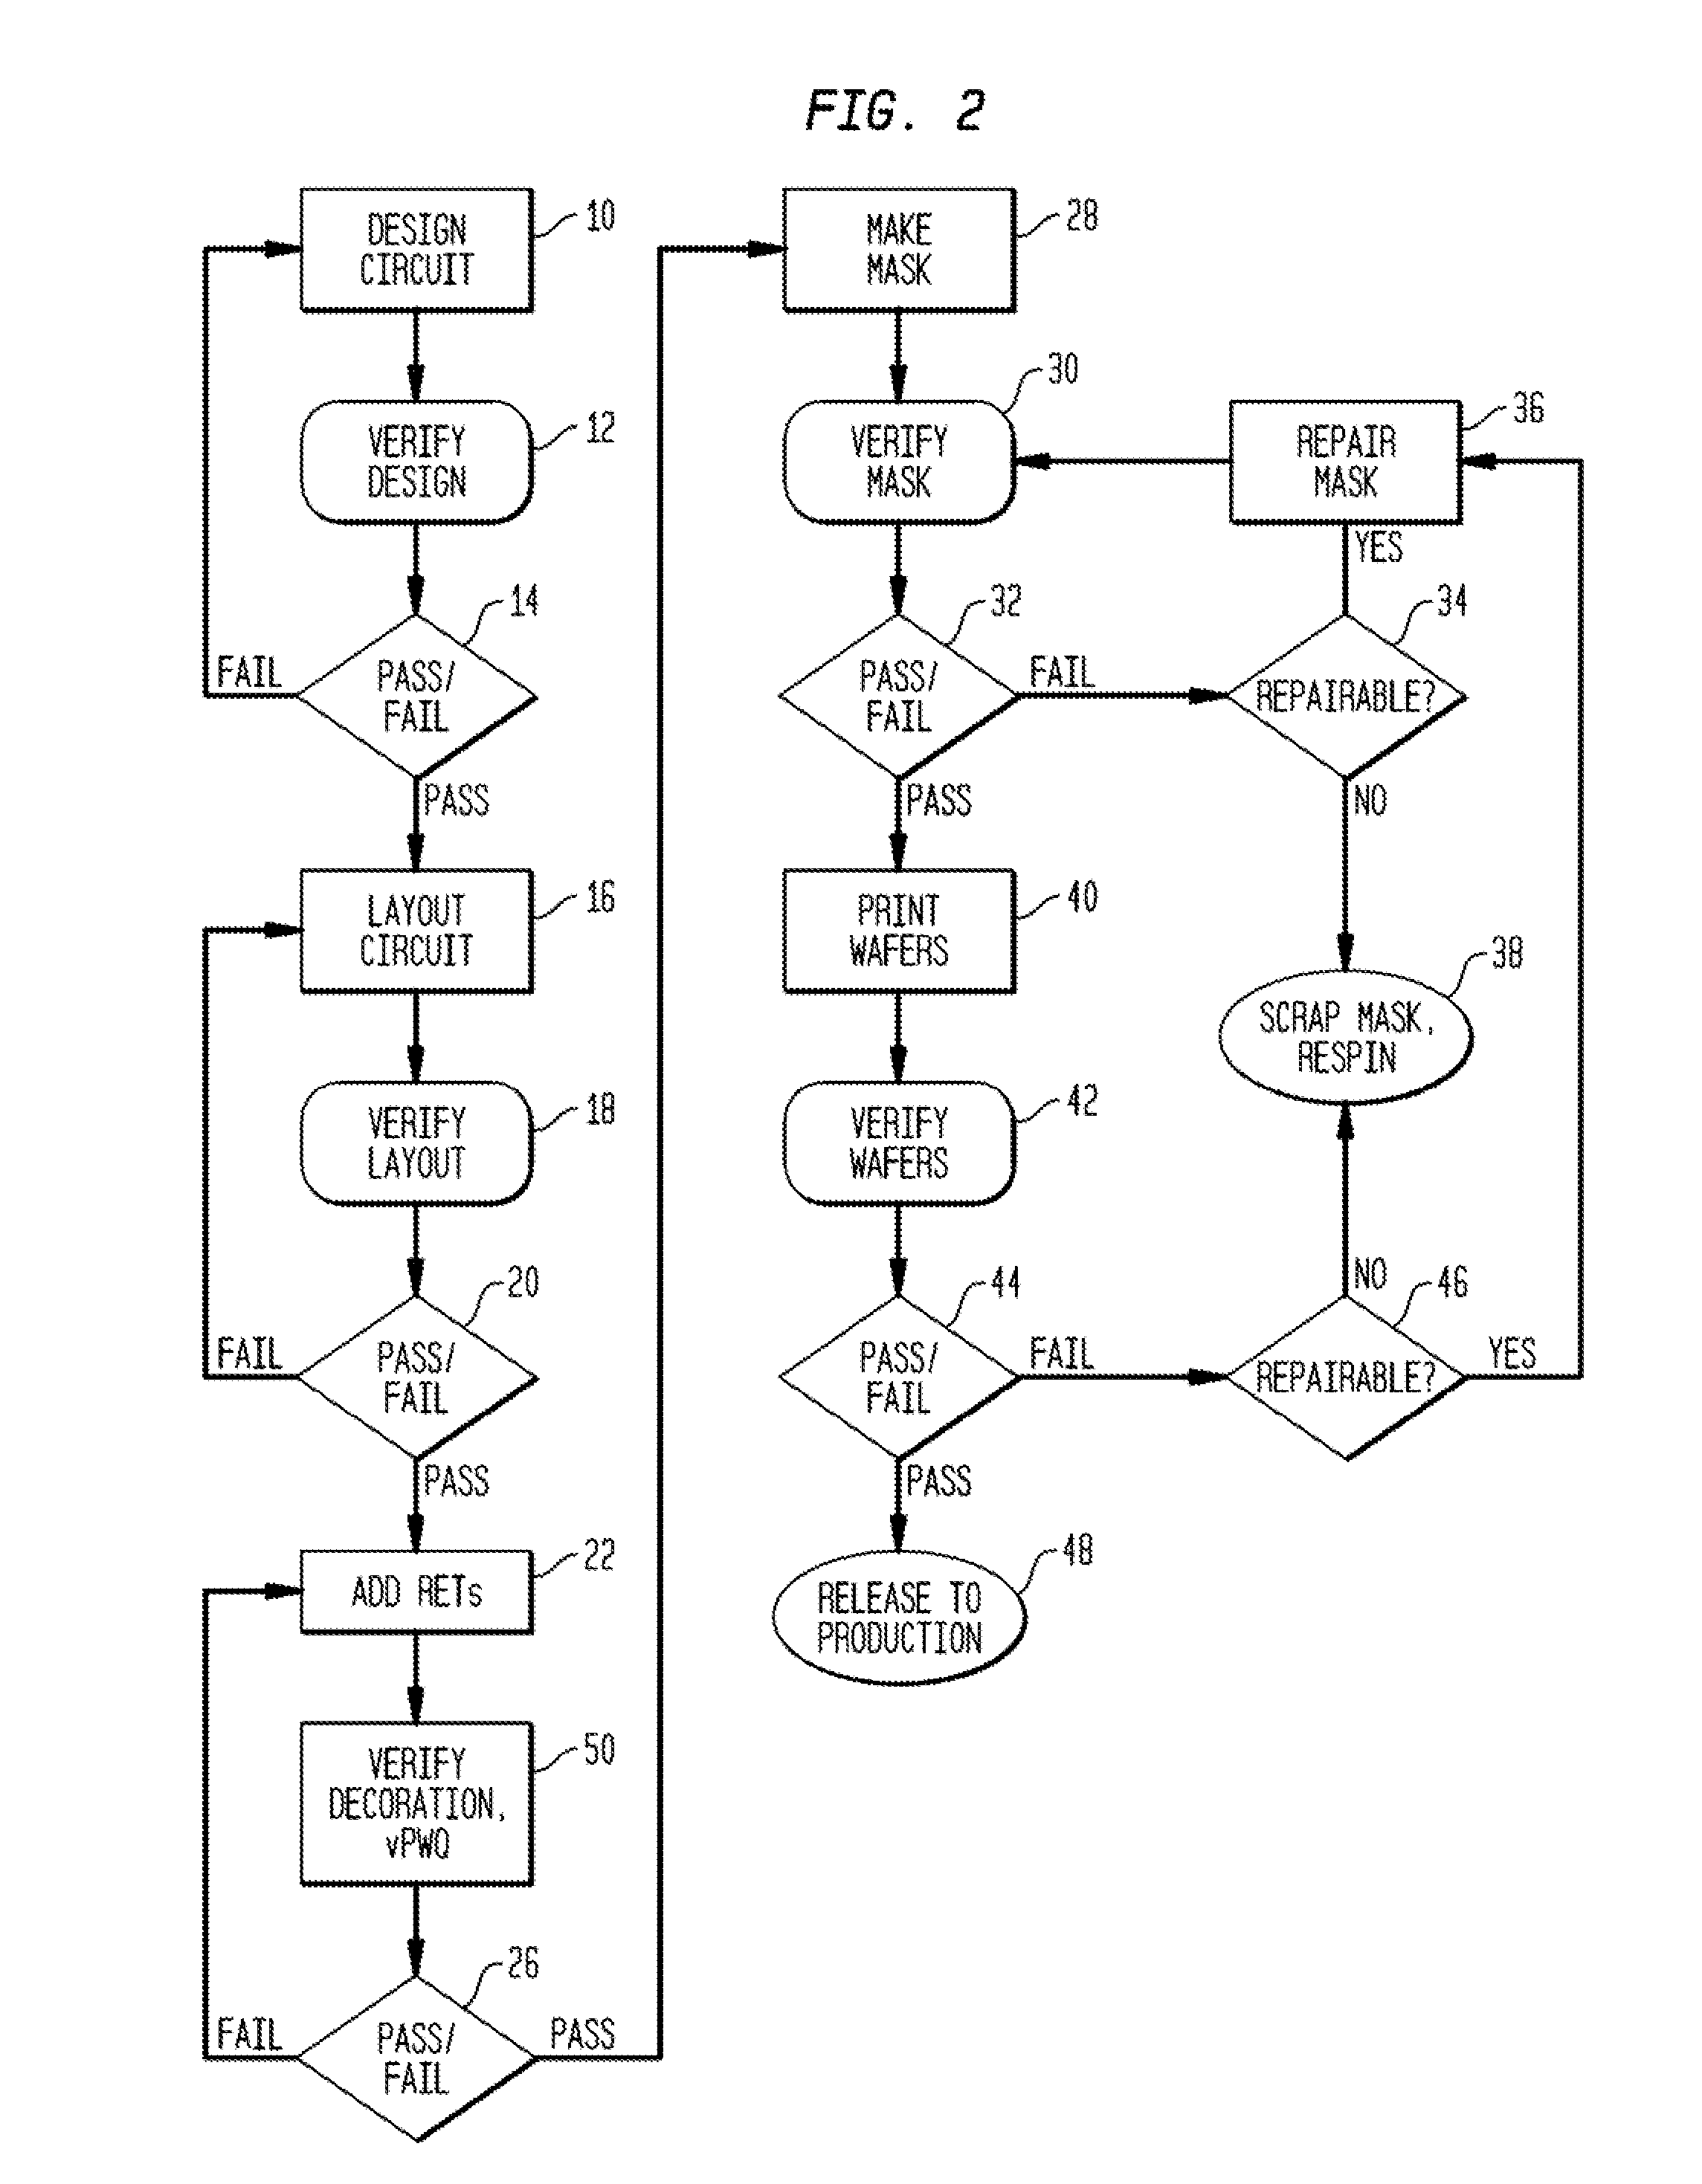 Computer-implemented methods and systems for determining different process windows for a wafer printing process for different reticle designs